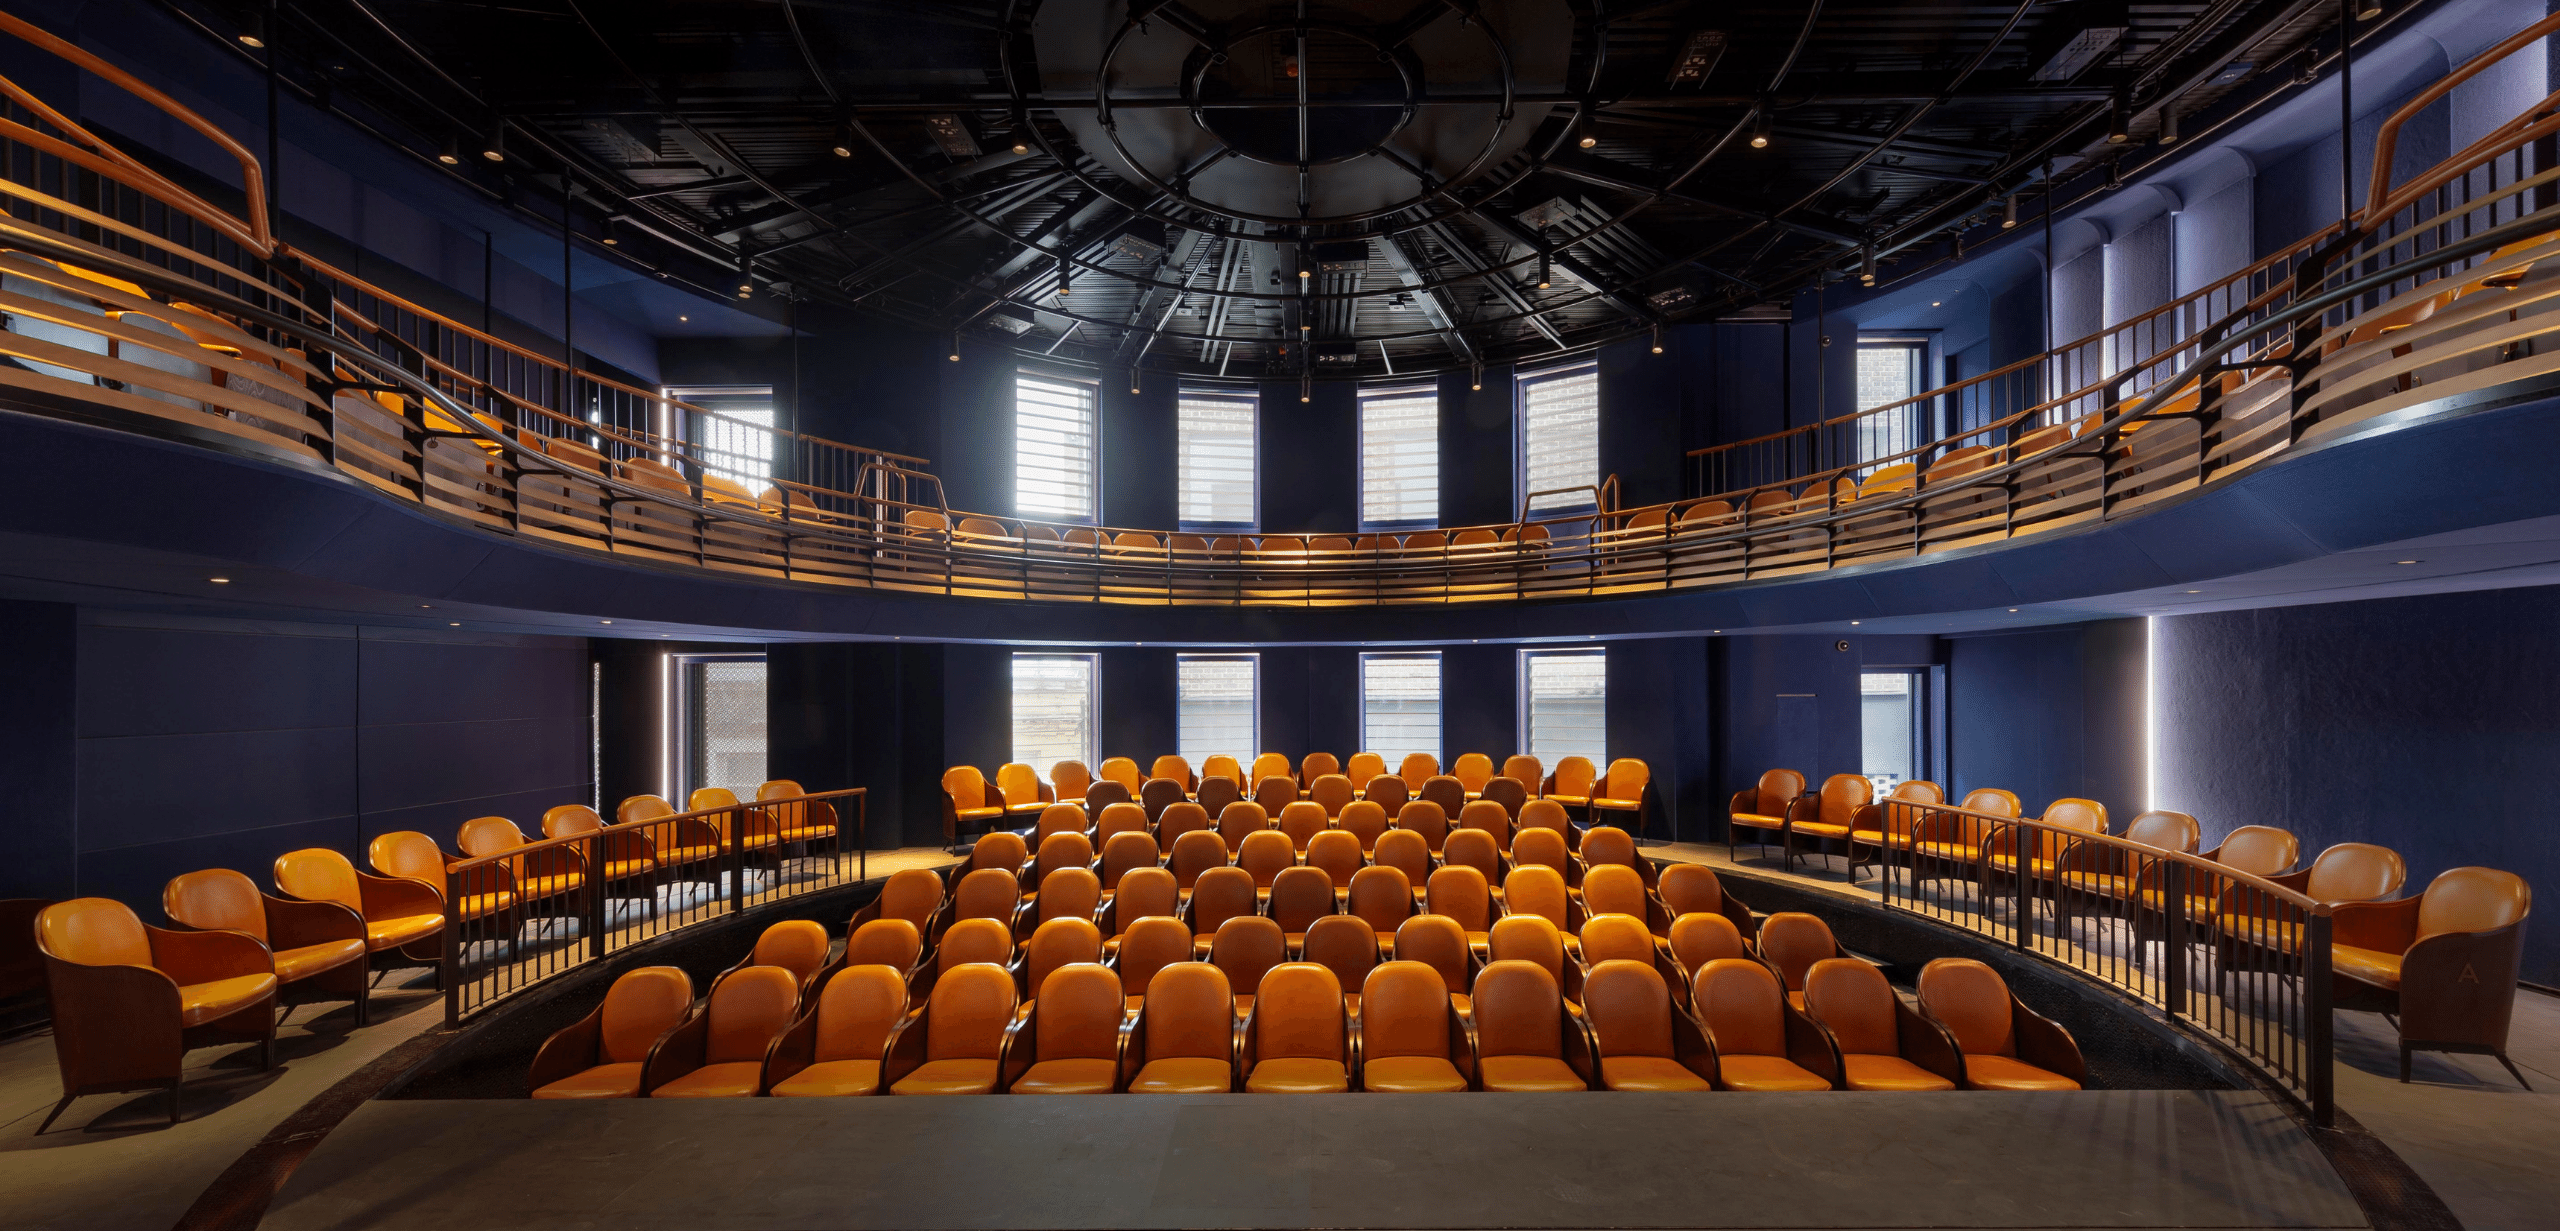 An auditorium with rows of auditorium seating and a circular ceiling.